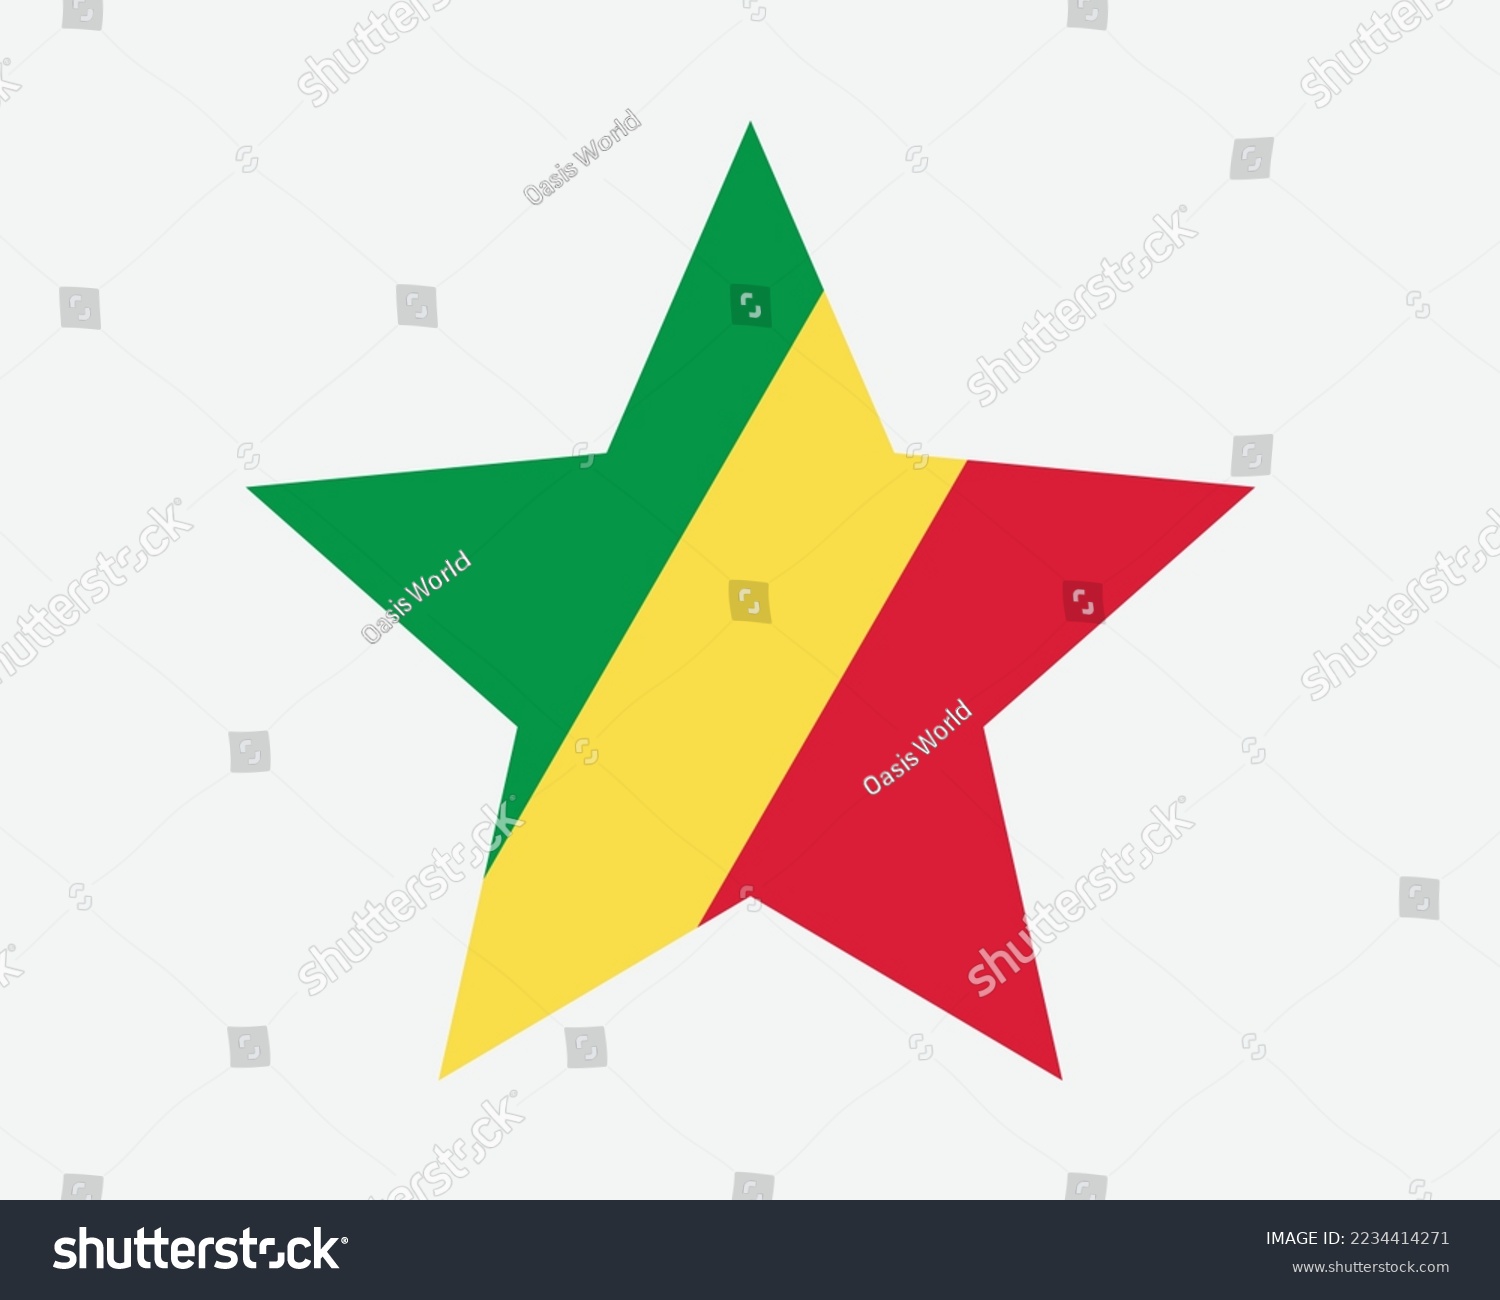 SVG of Republic of the Congo Star Flag. Congolese Star Shape Flag. The Congo Country National Banner Icon Symbol Vector 2D Flat Artwork Graphic Illustration svg